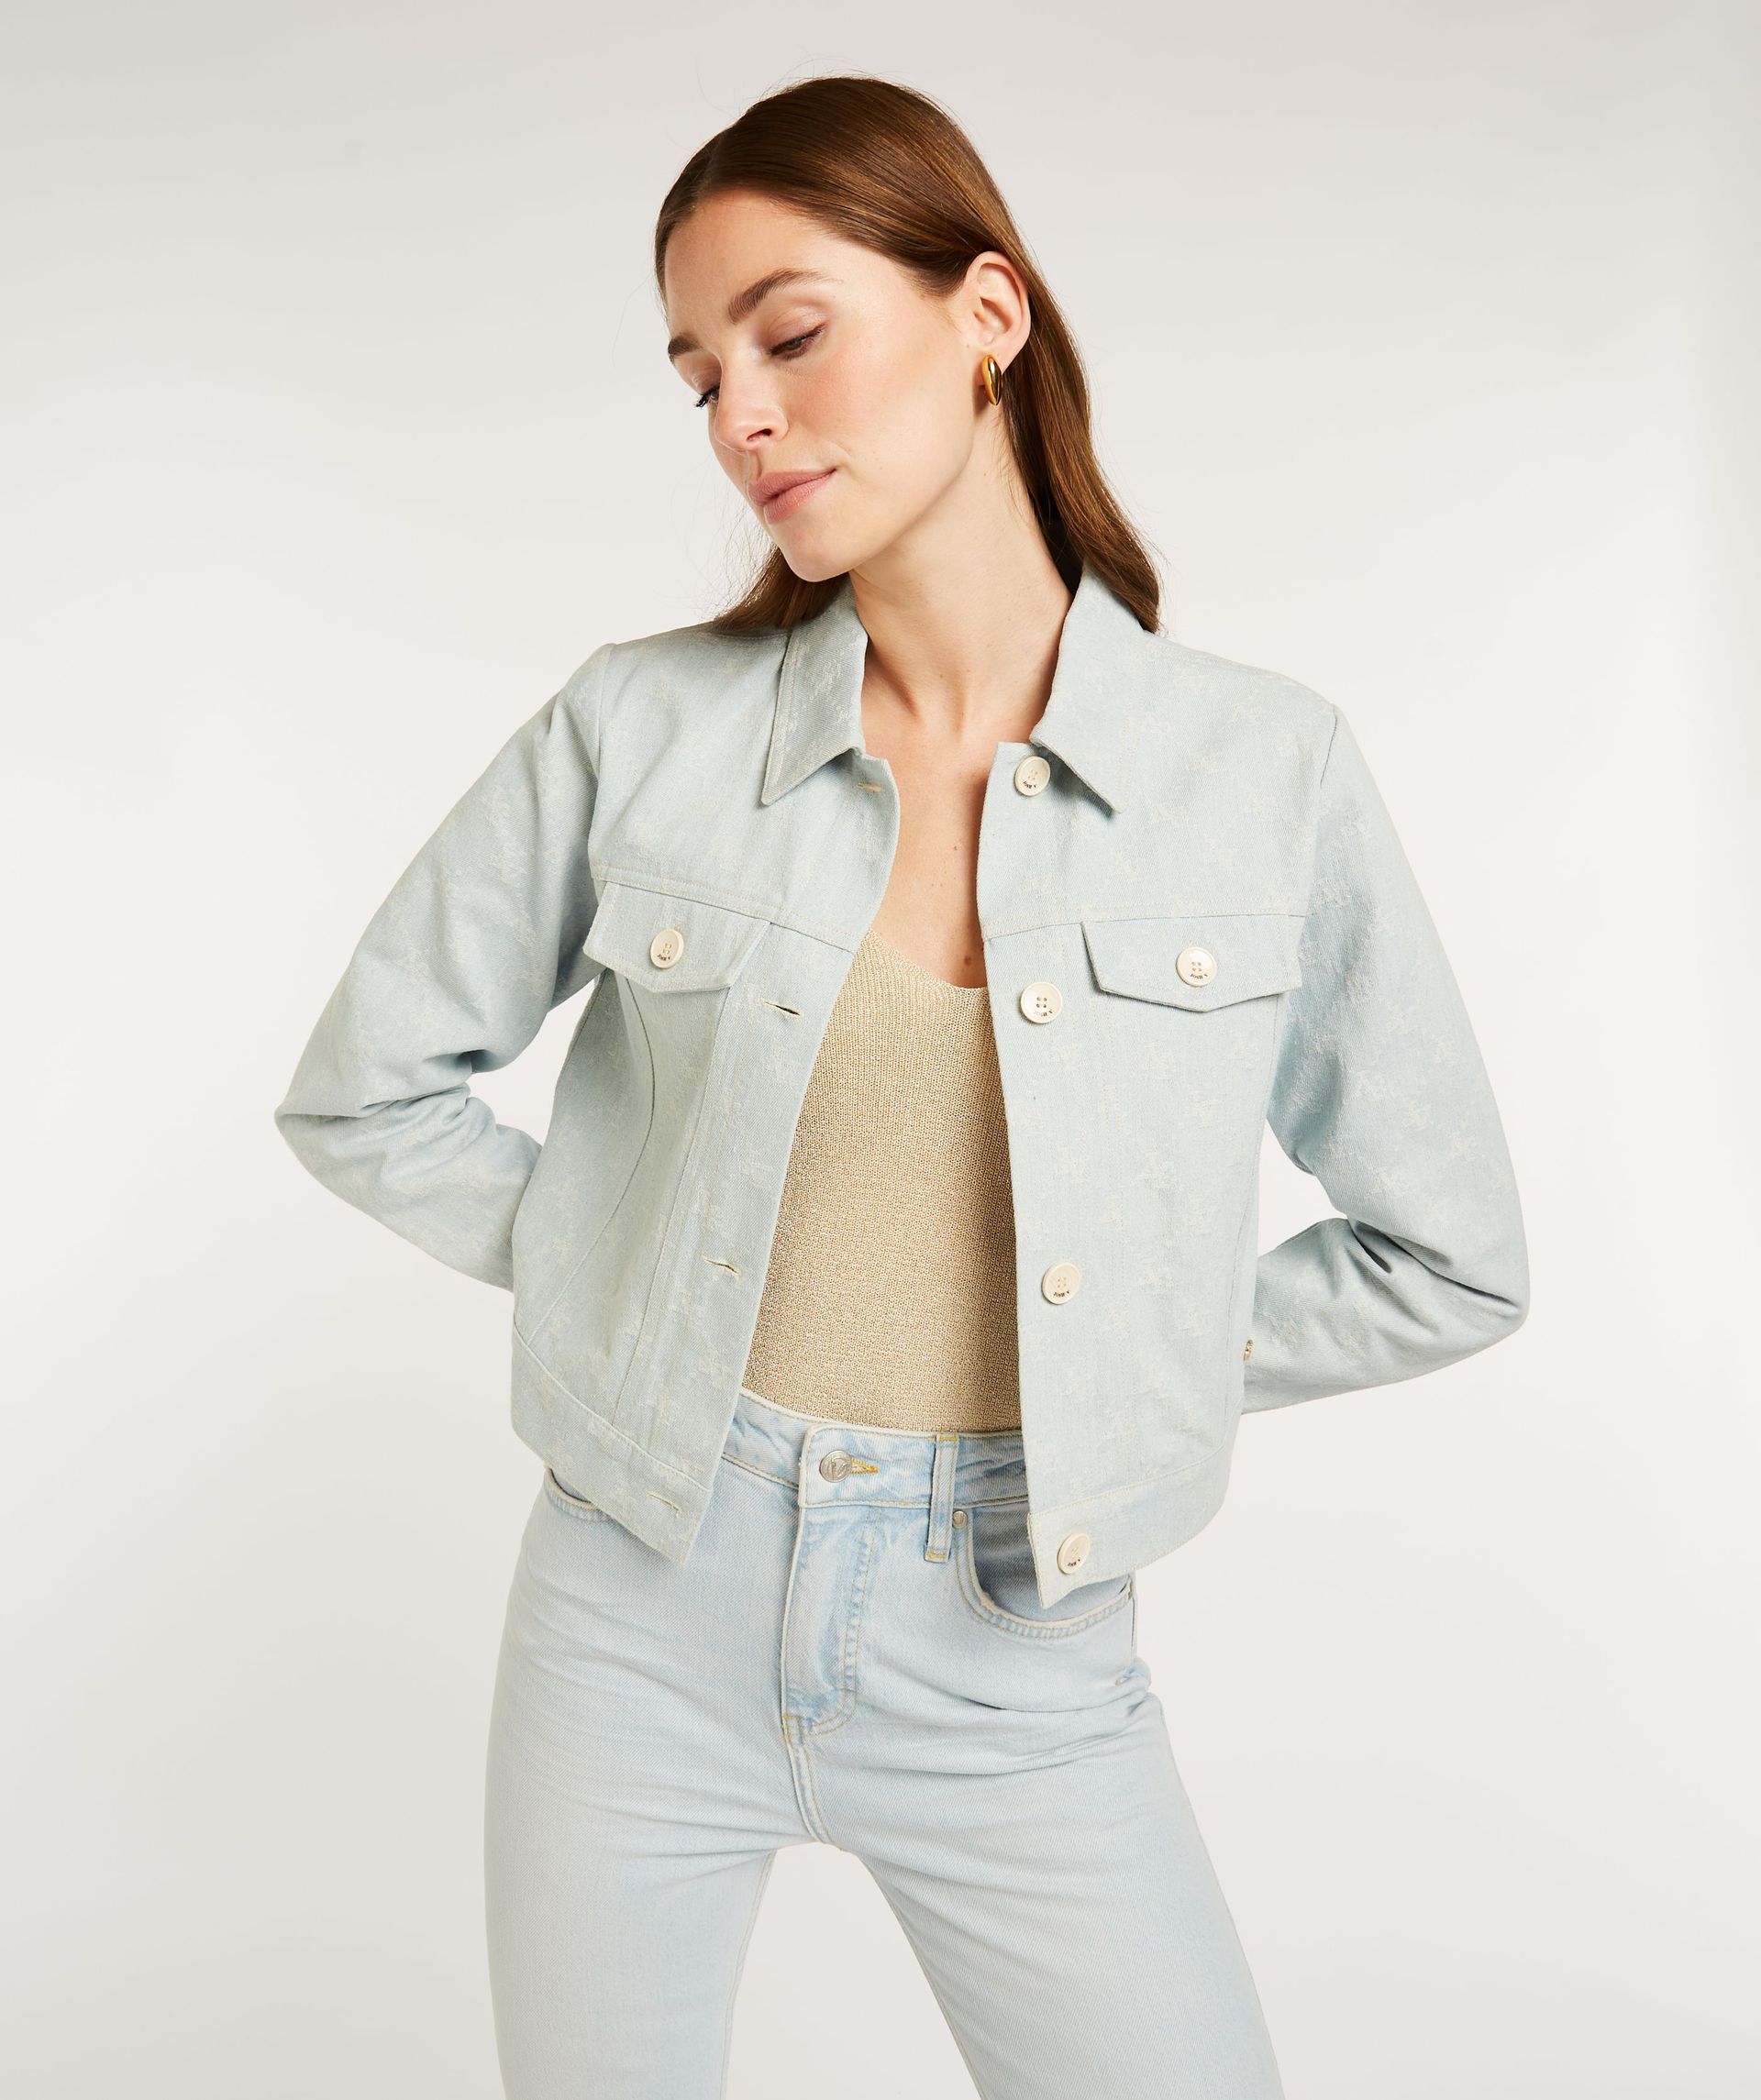 Multitrust Basic Fitted Denim Jacket for Women, Long Sleeve Solid Color  Casual Button Down Chest Pocket Jean Tops - Walmart.com